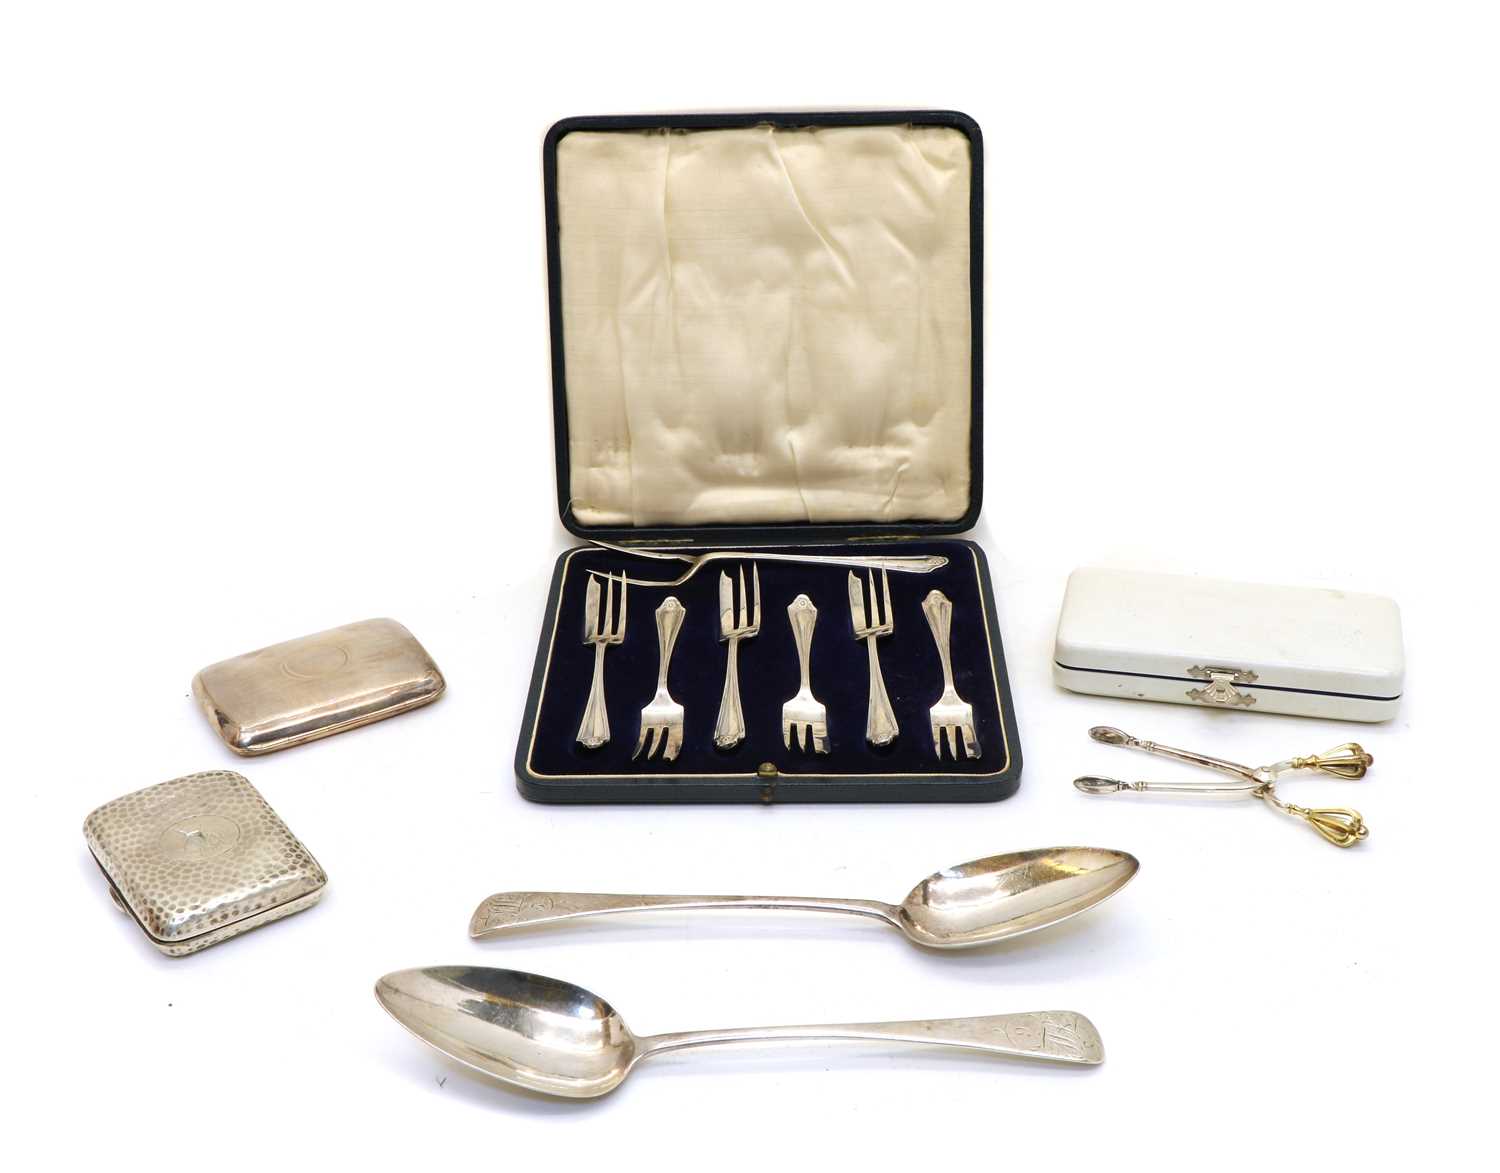 Lot 29 - A collection of silver items